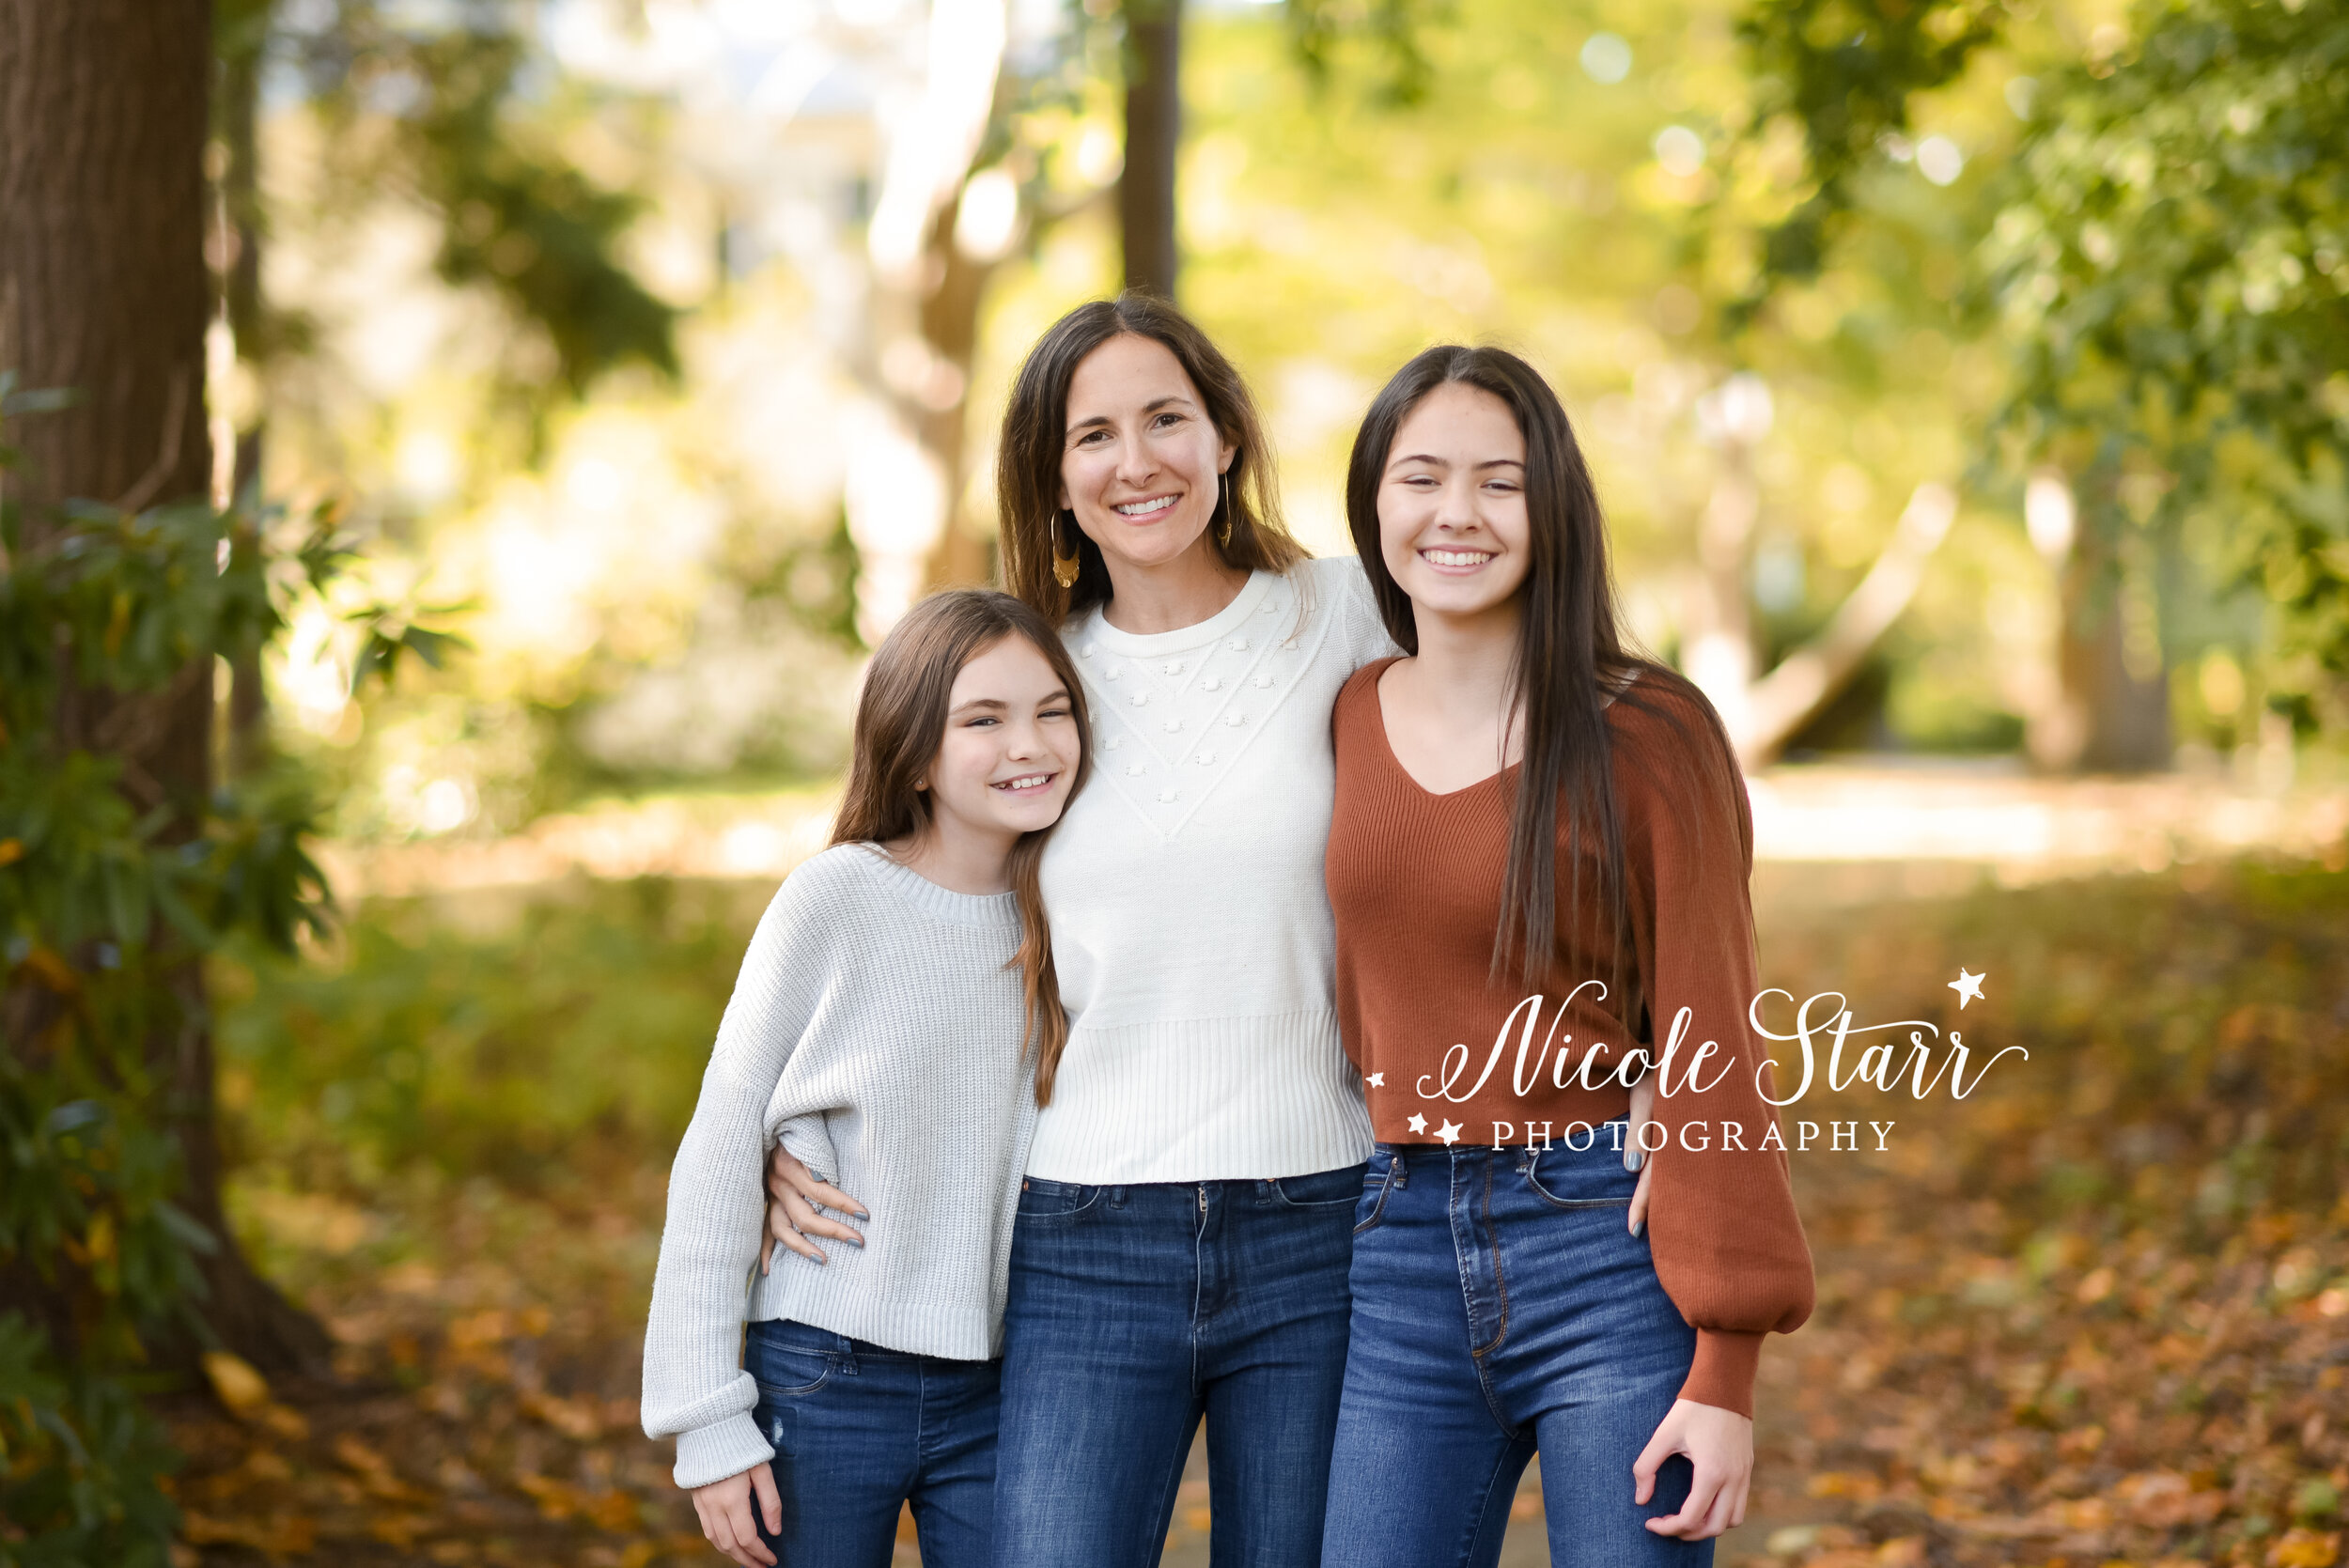 Photography/adults/family | Family photo pose, Big family photos, Large  family poses